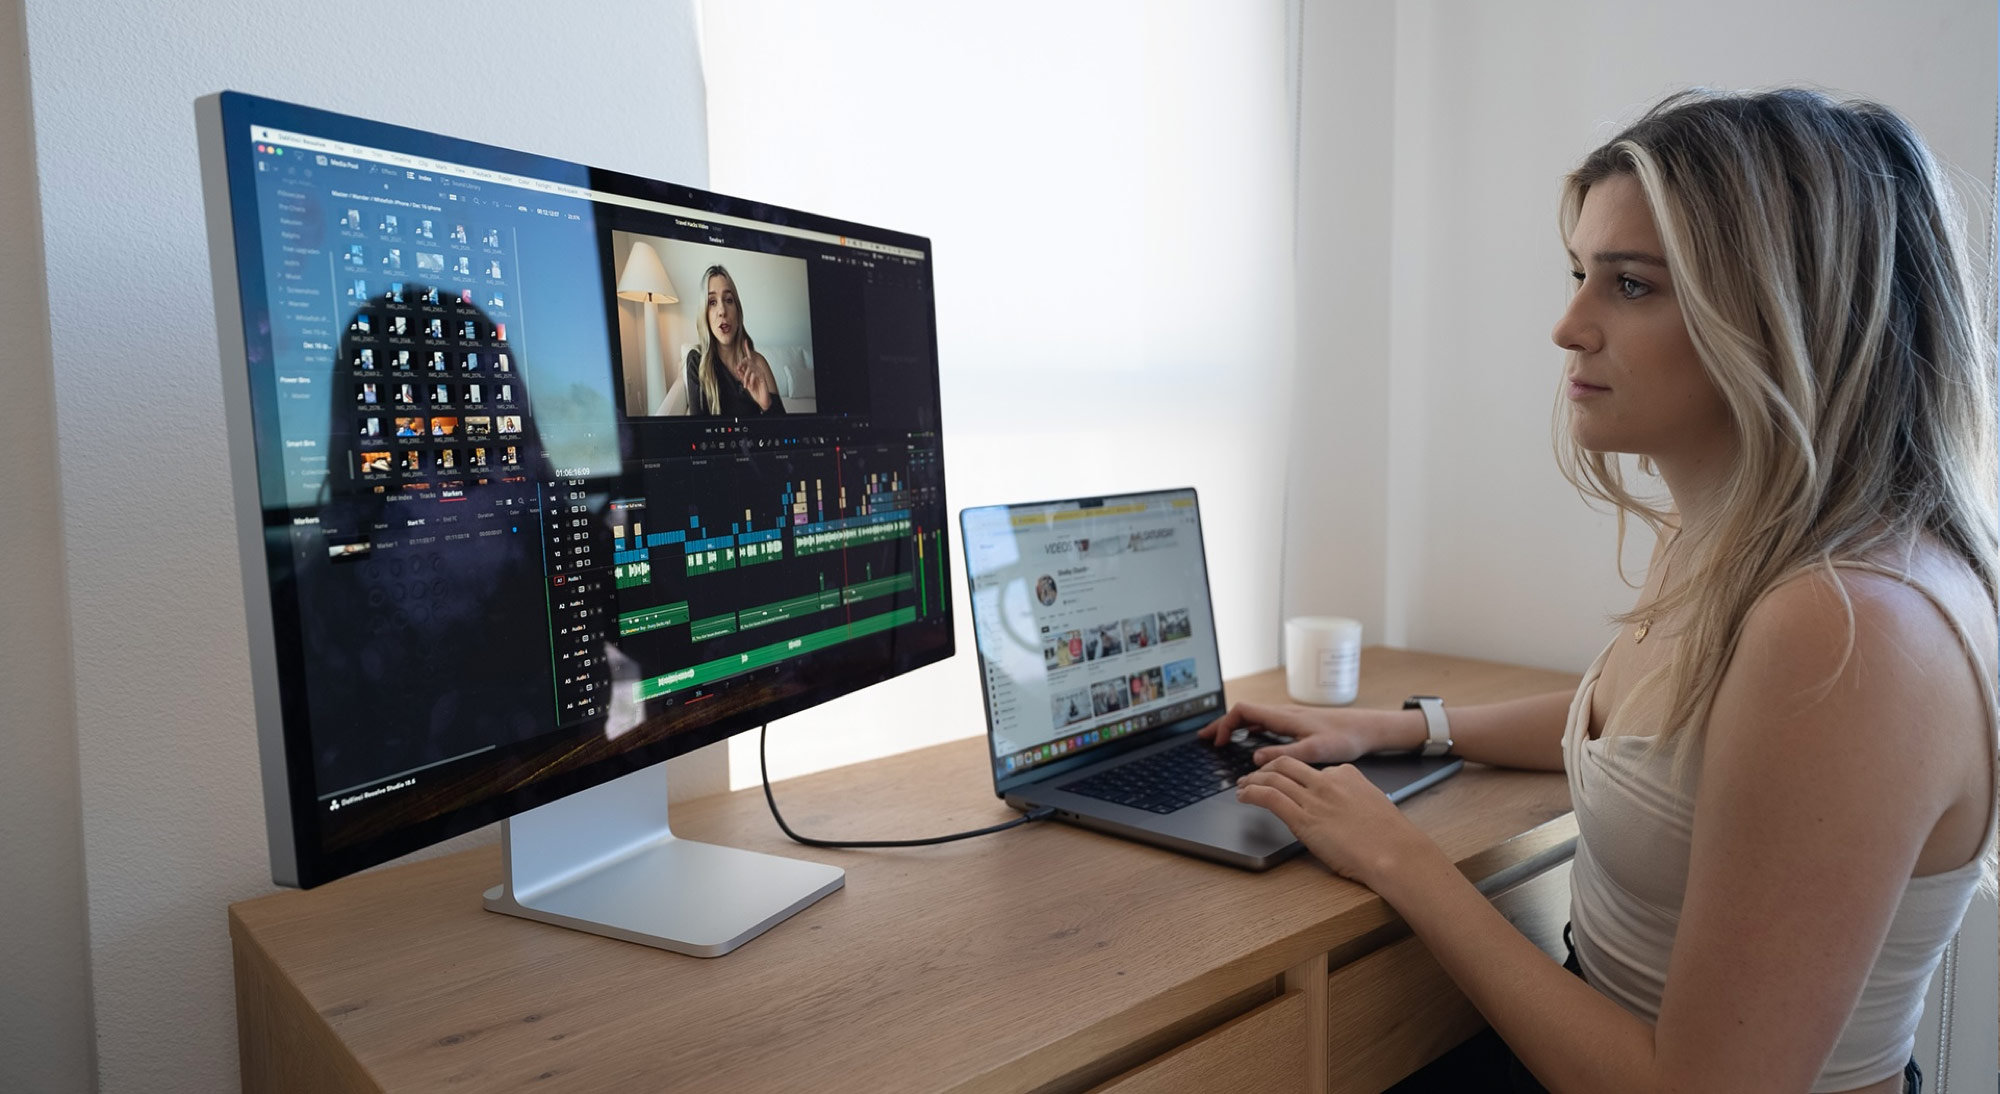 YouTubers, tech lifestyle influencers and DaVinci Resolve